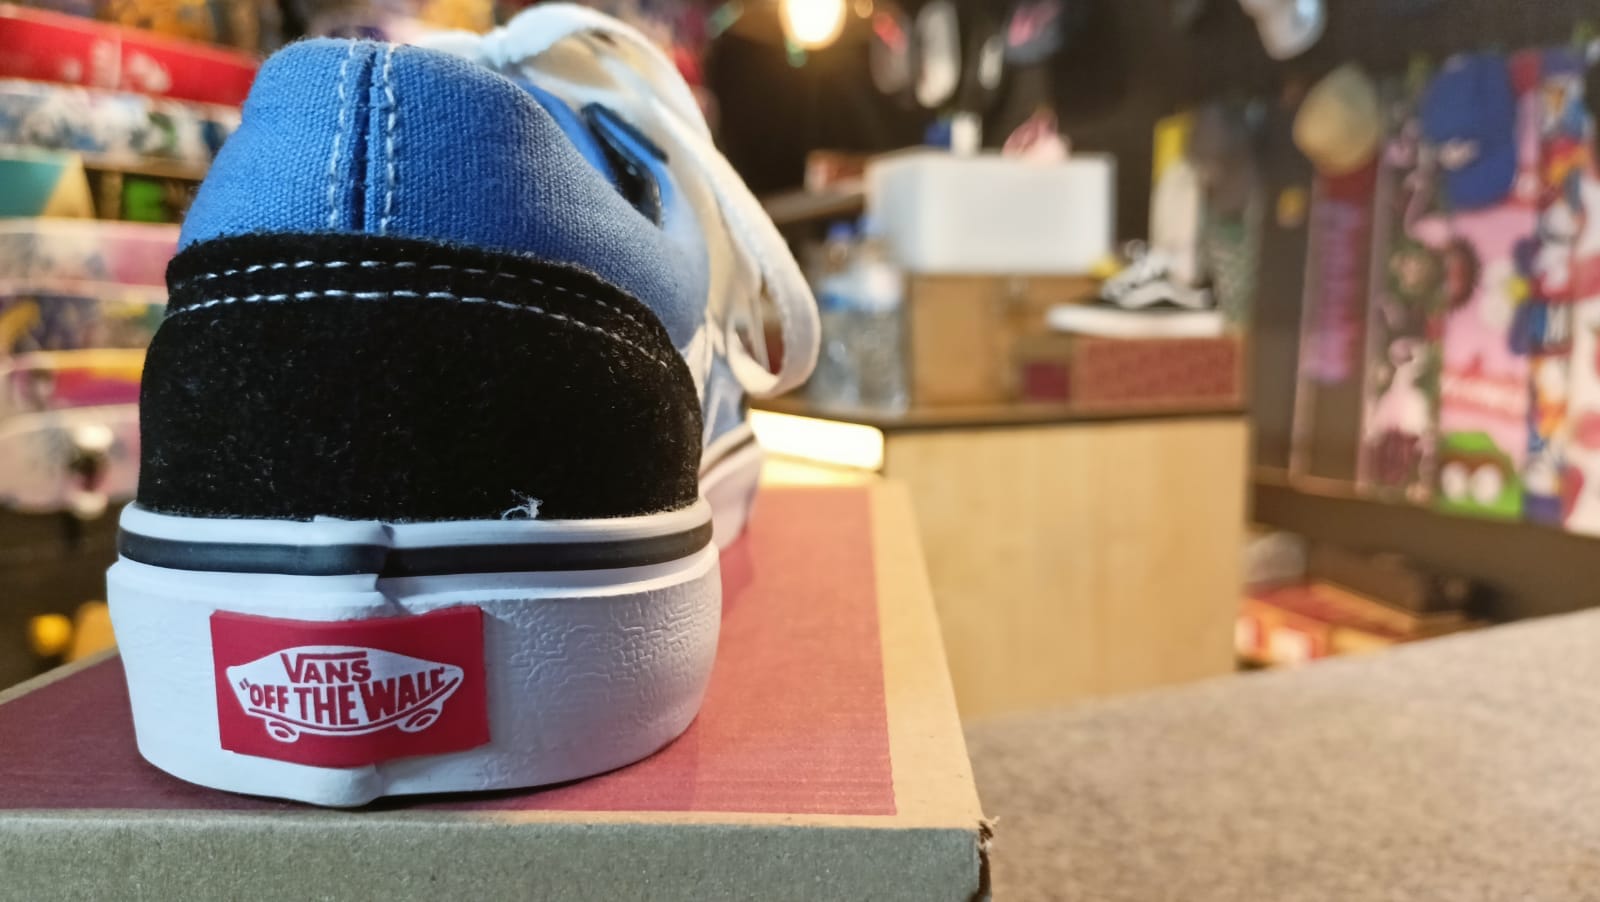 Are Vans skate shoes good for beginners?